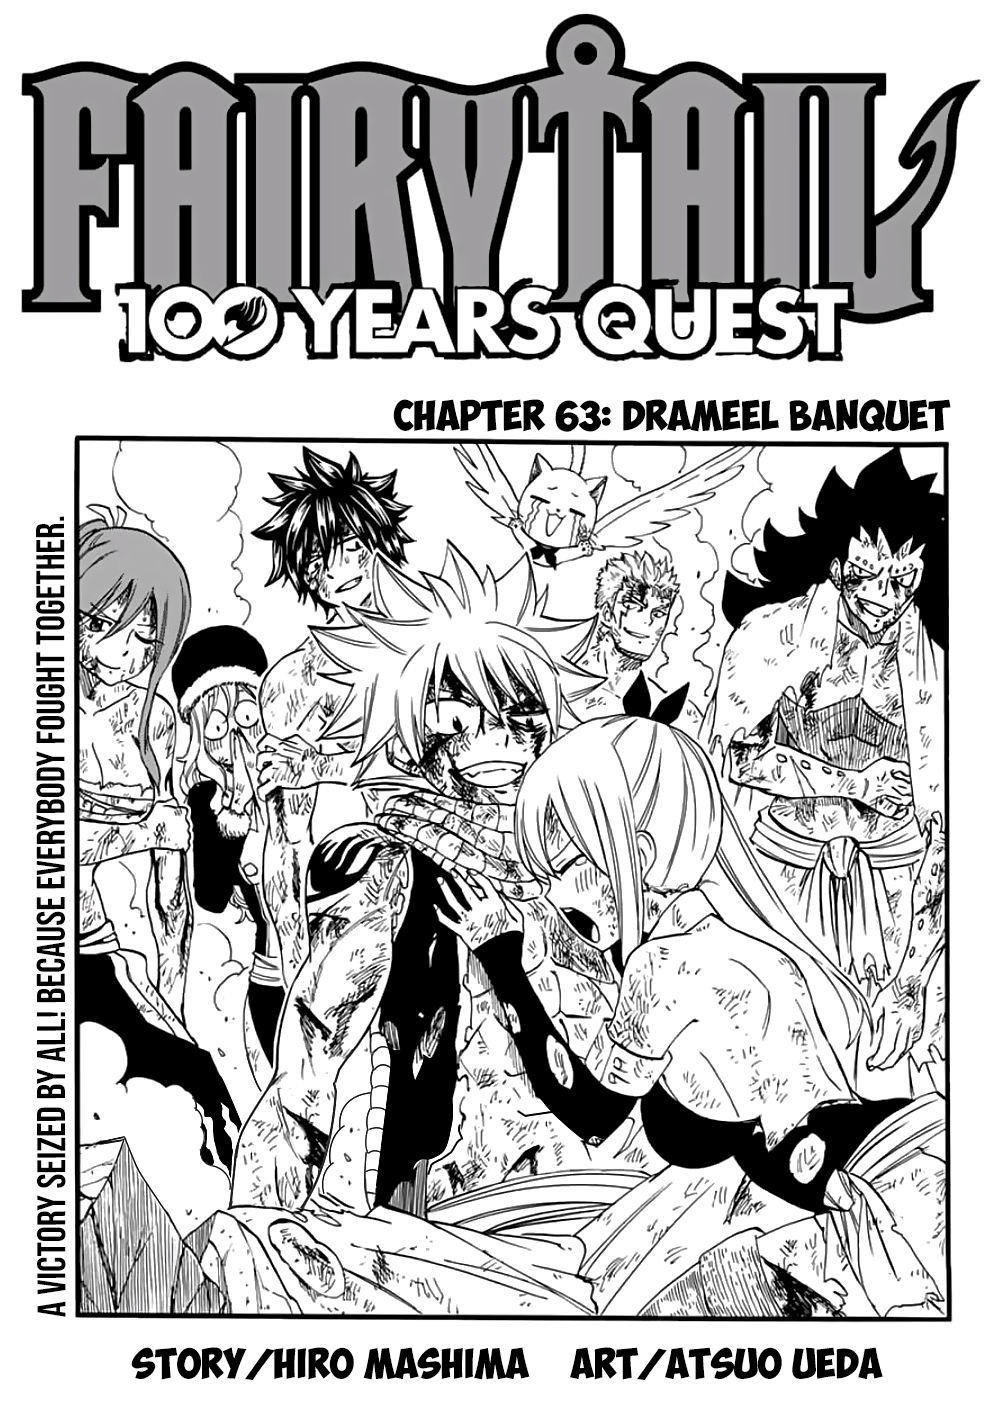 Read Fairy Tail: 100 Years Quest Manga in English Free Online